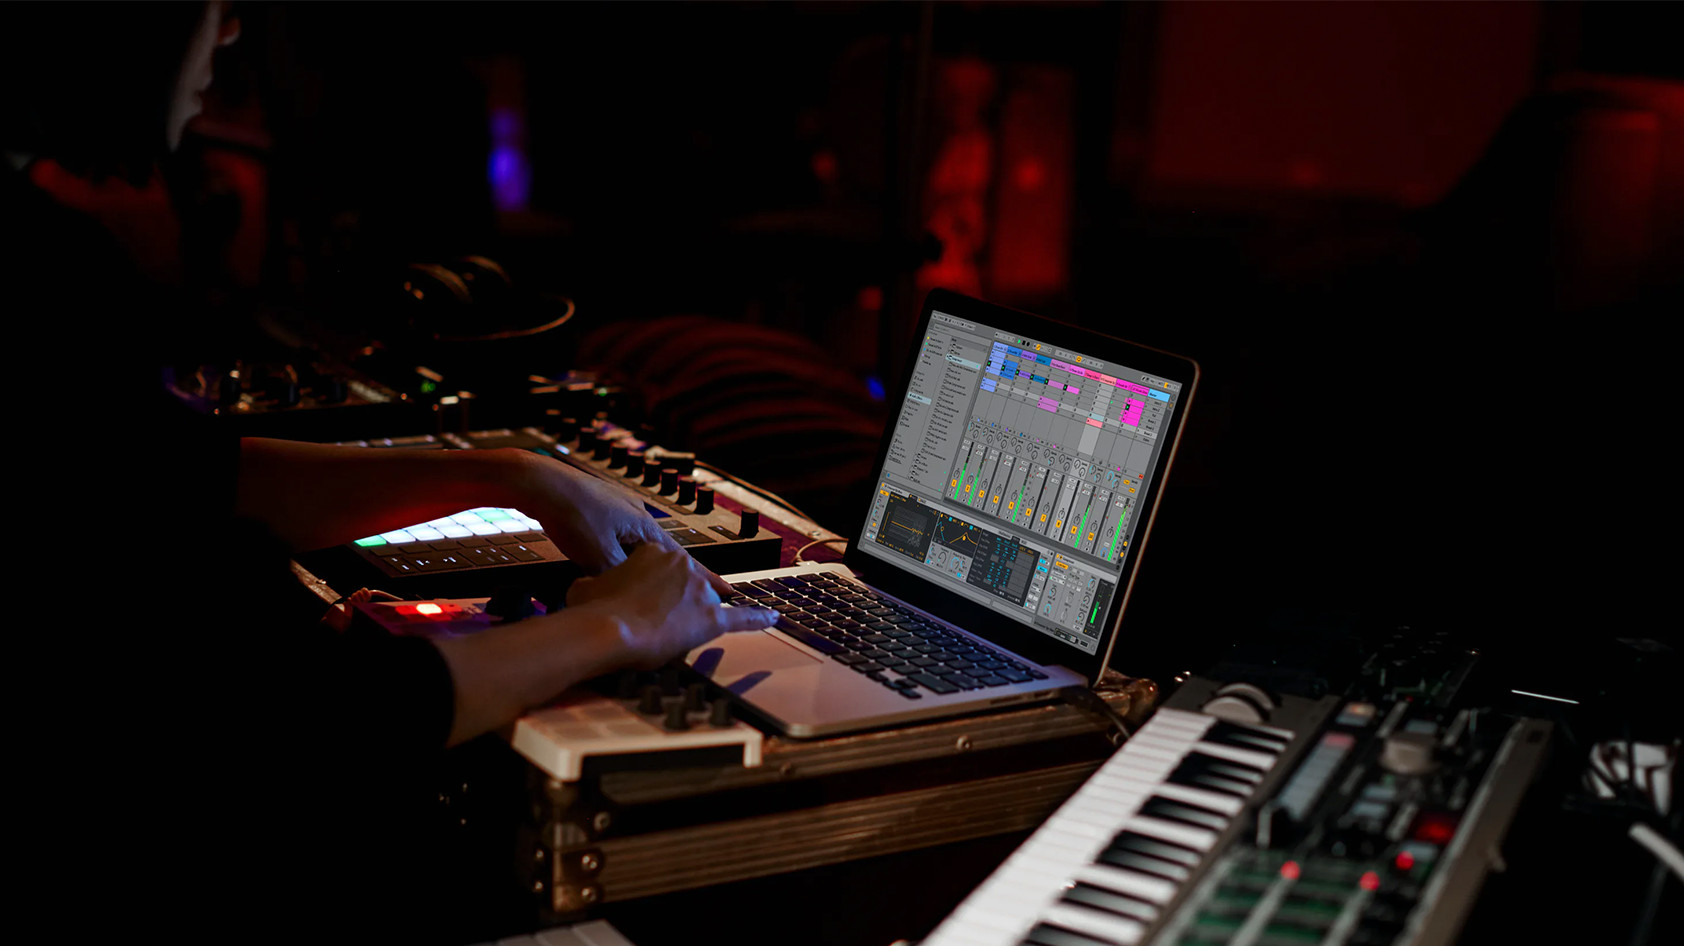 This is a picture the DAW Ableton Live running on a Windows machine during a live performance.